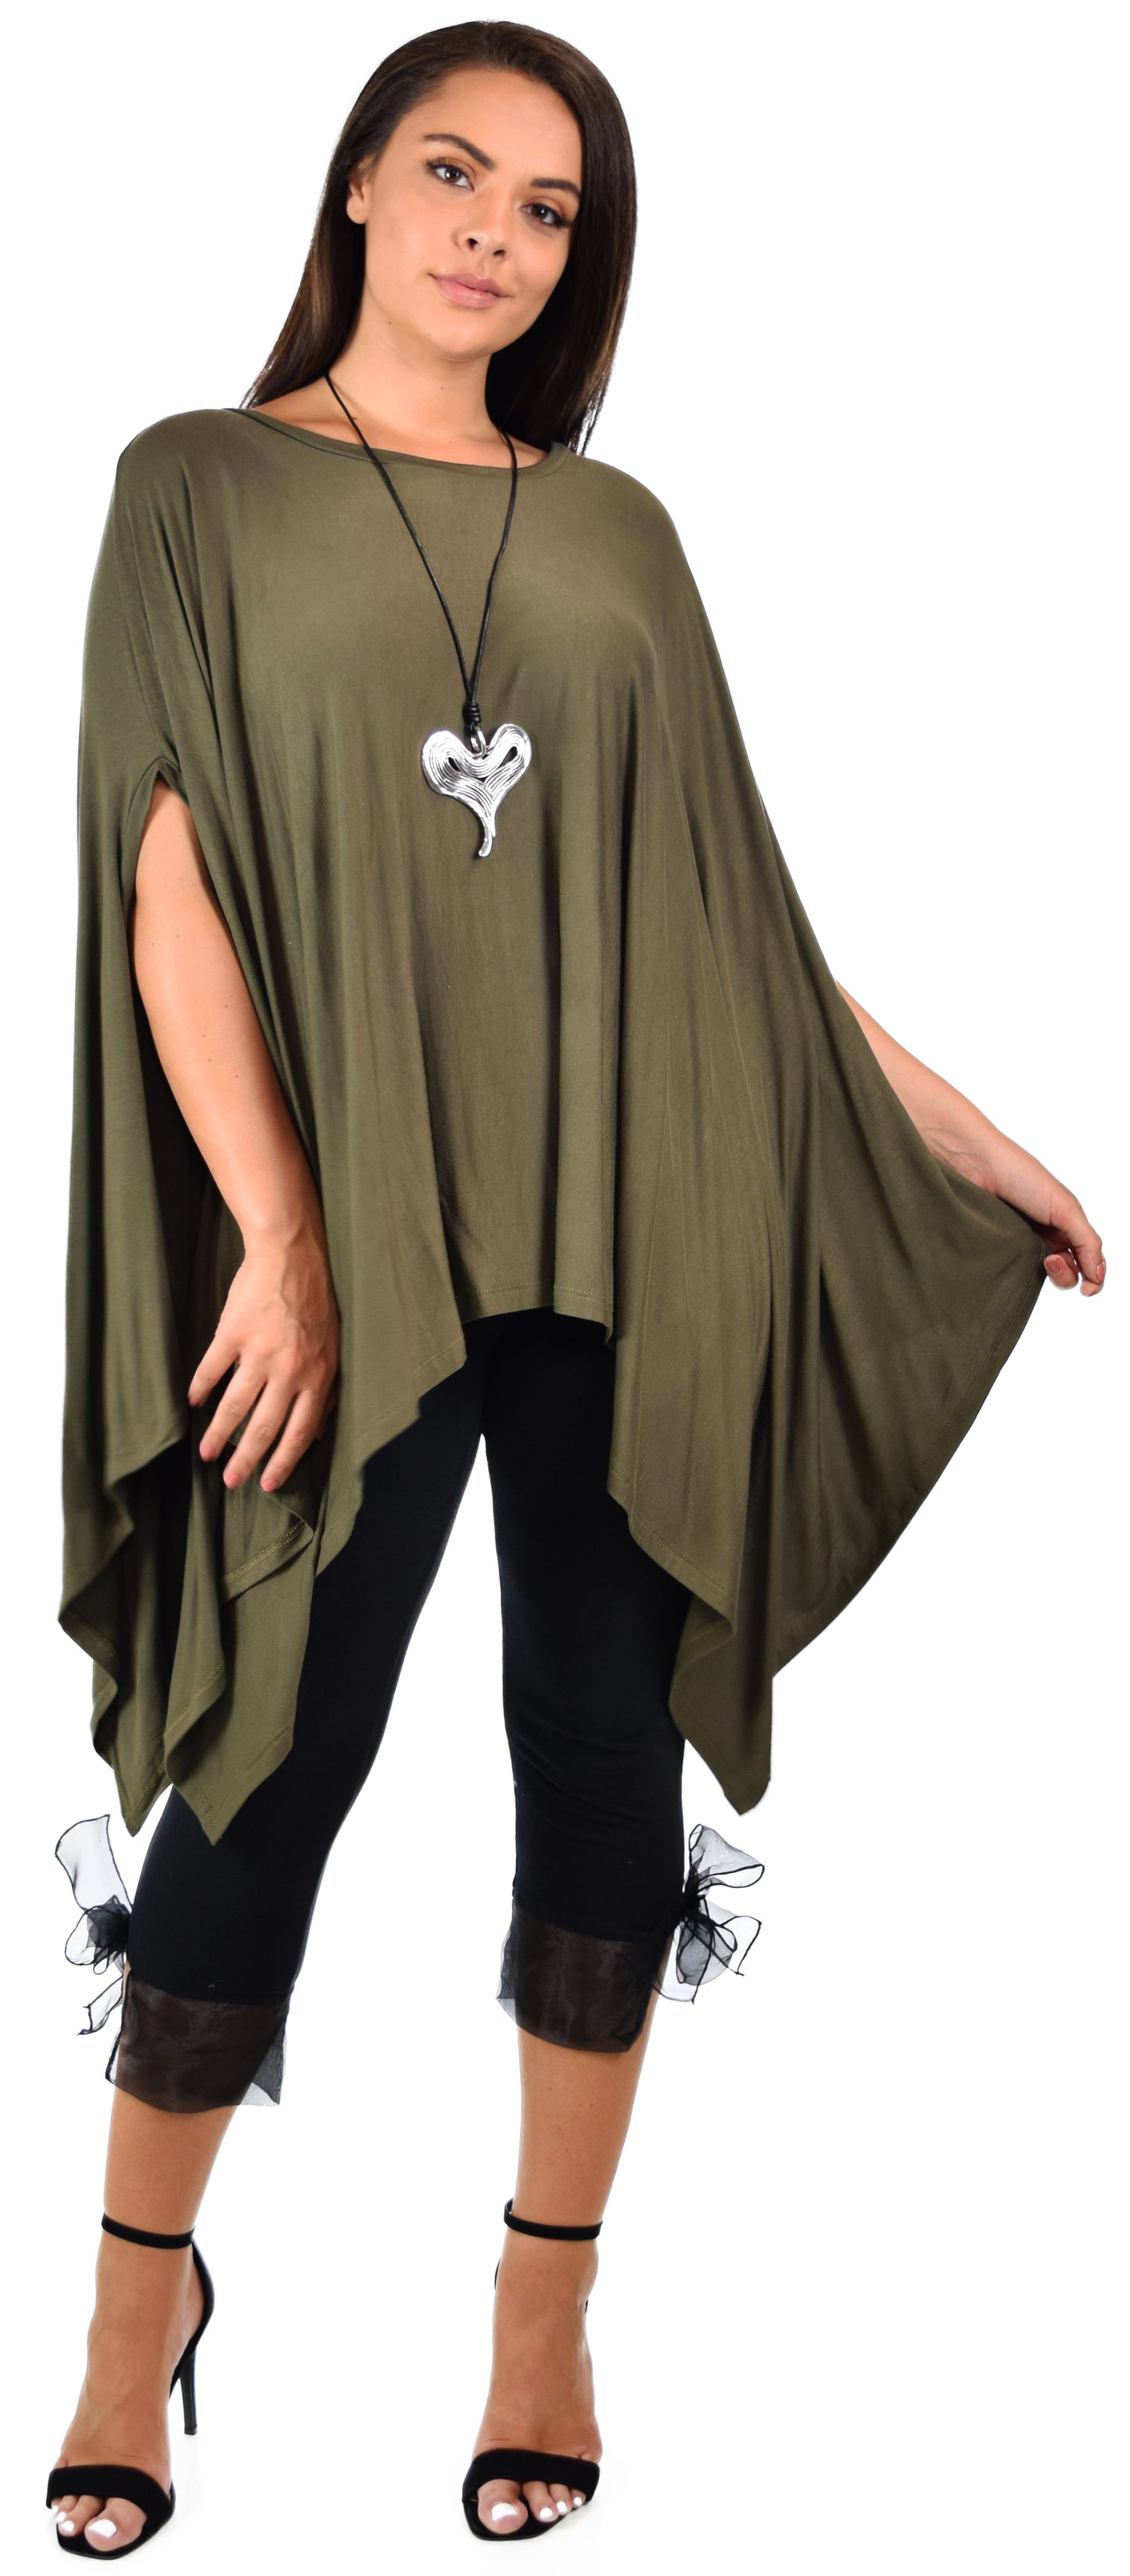 Versatile Summer Poncho, Beach Wear, One size Poncho, Plus size Poncho, Oversize Summer Poncho, Curvy Top, Cruise Wear, Fits Small to 5XL